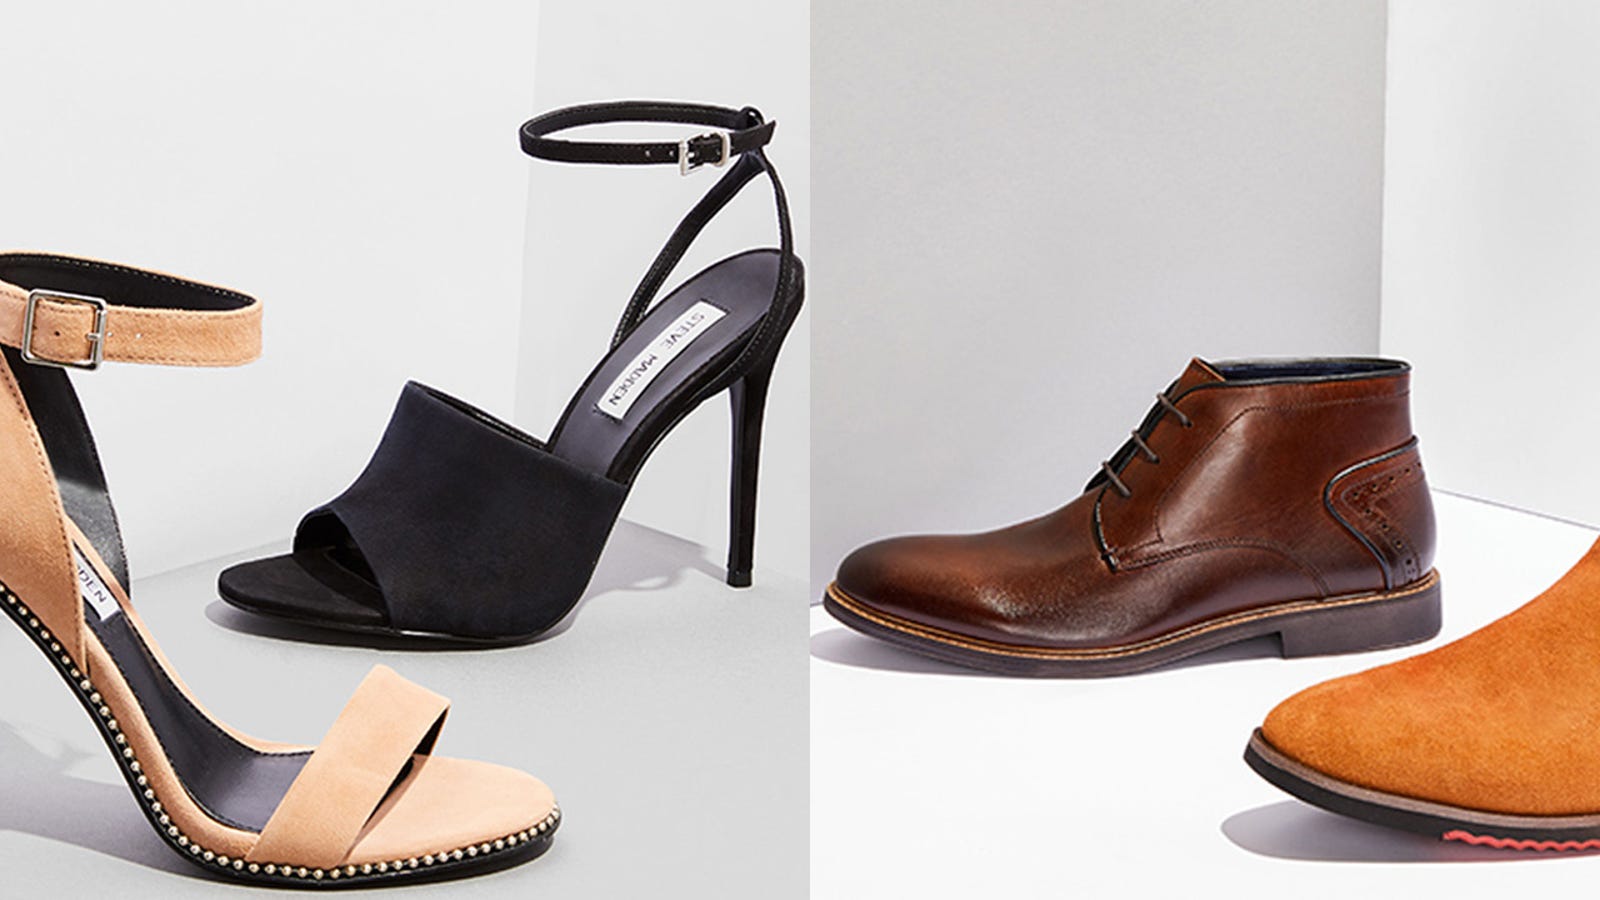 Snag New Steve Madden Shoes From This Nordstrom Rack Sale